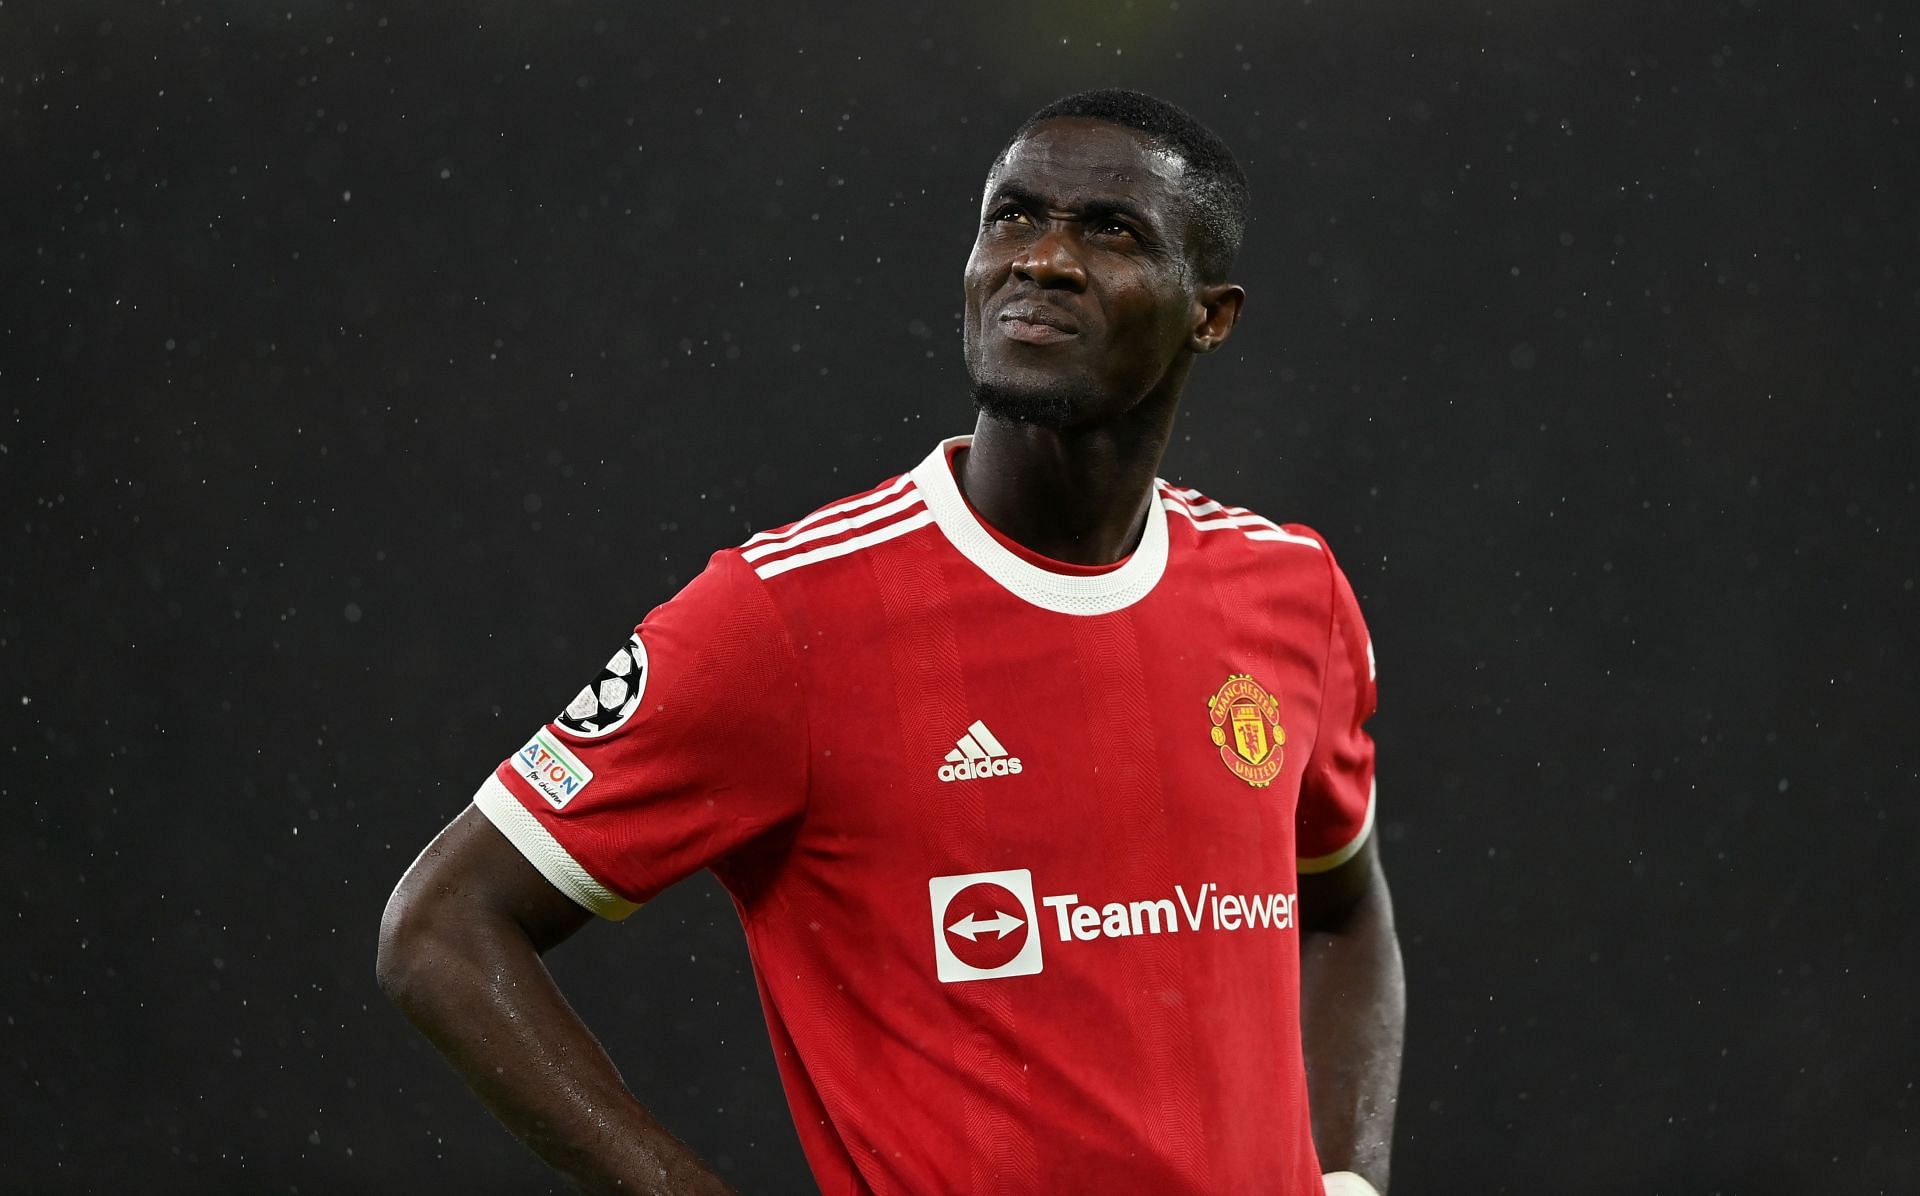 AC Milan are working on a loan deal for Eric Bailly.